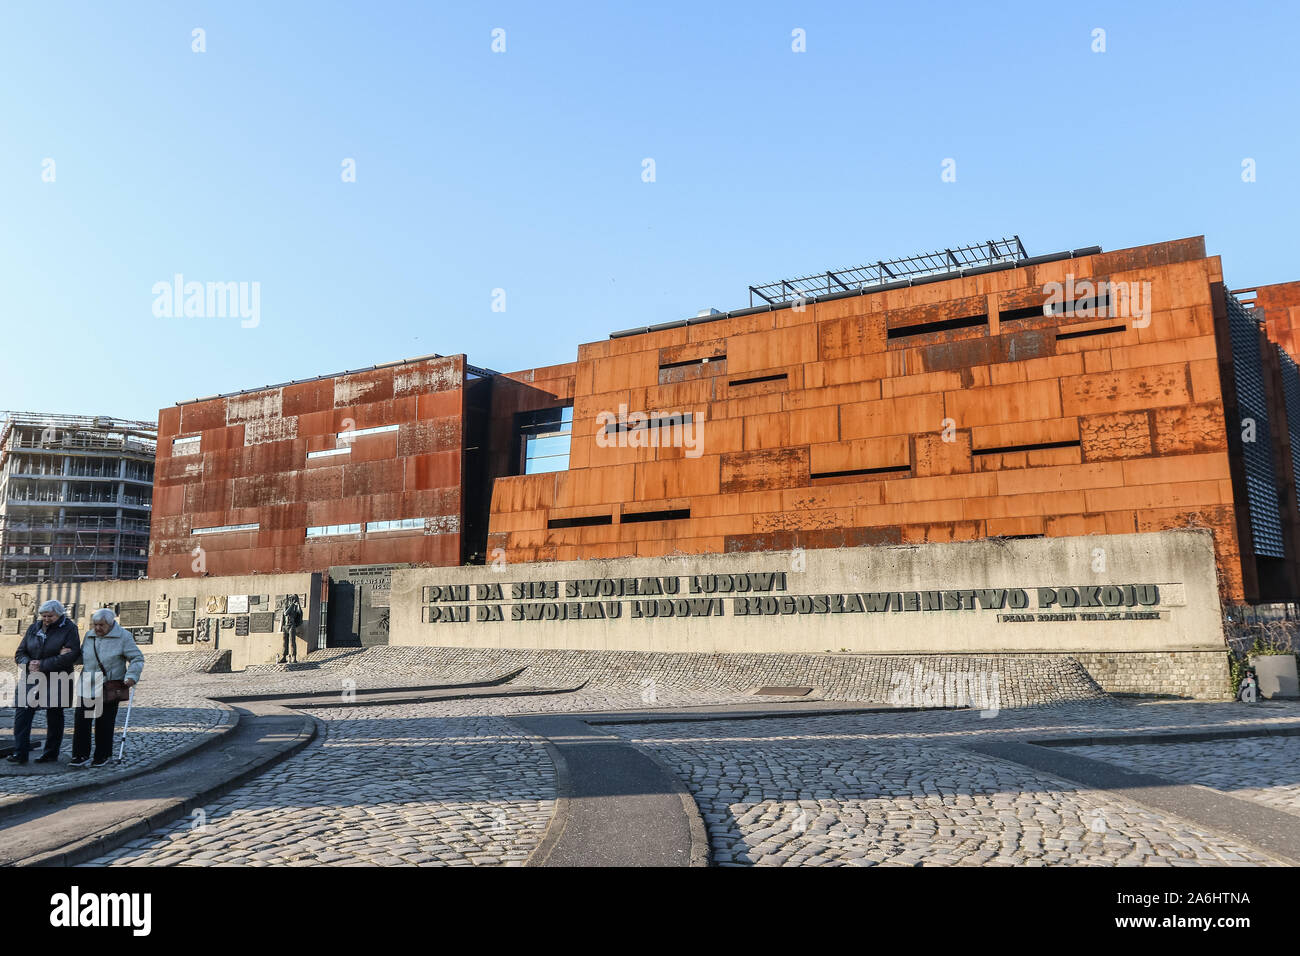 ECS (European Solidarity Centre) building on the Solidarity Square in front of historical Gdansk Shipyar  is seen in Gdansk, Poland on 6 April 2019  © Michal Fludra / Alamy Live News Stock Photo